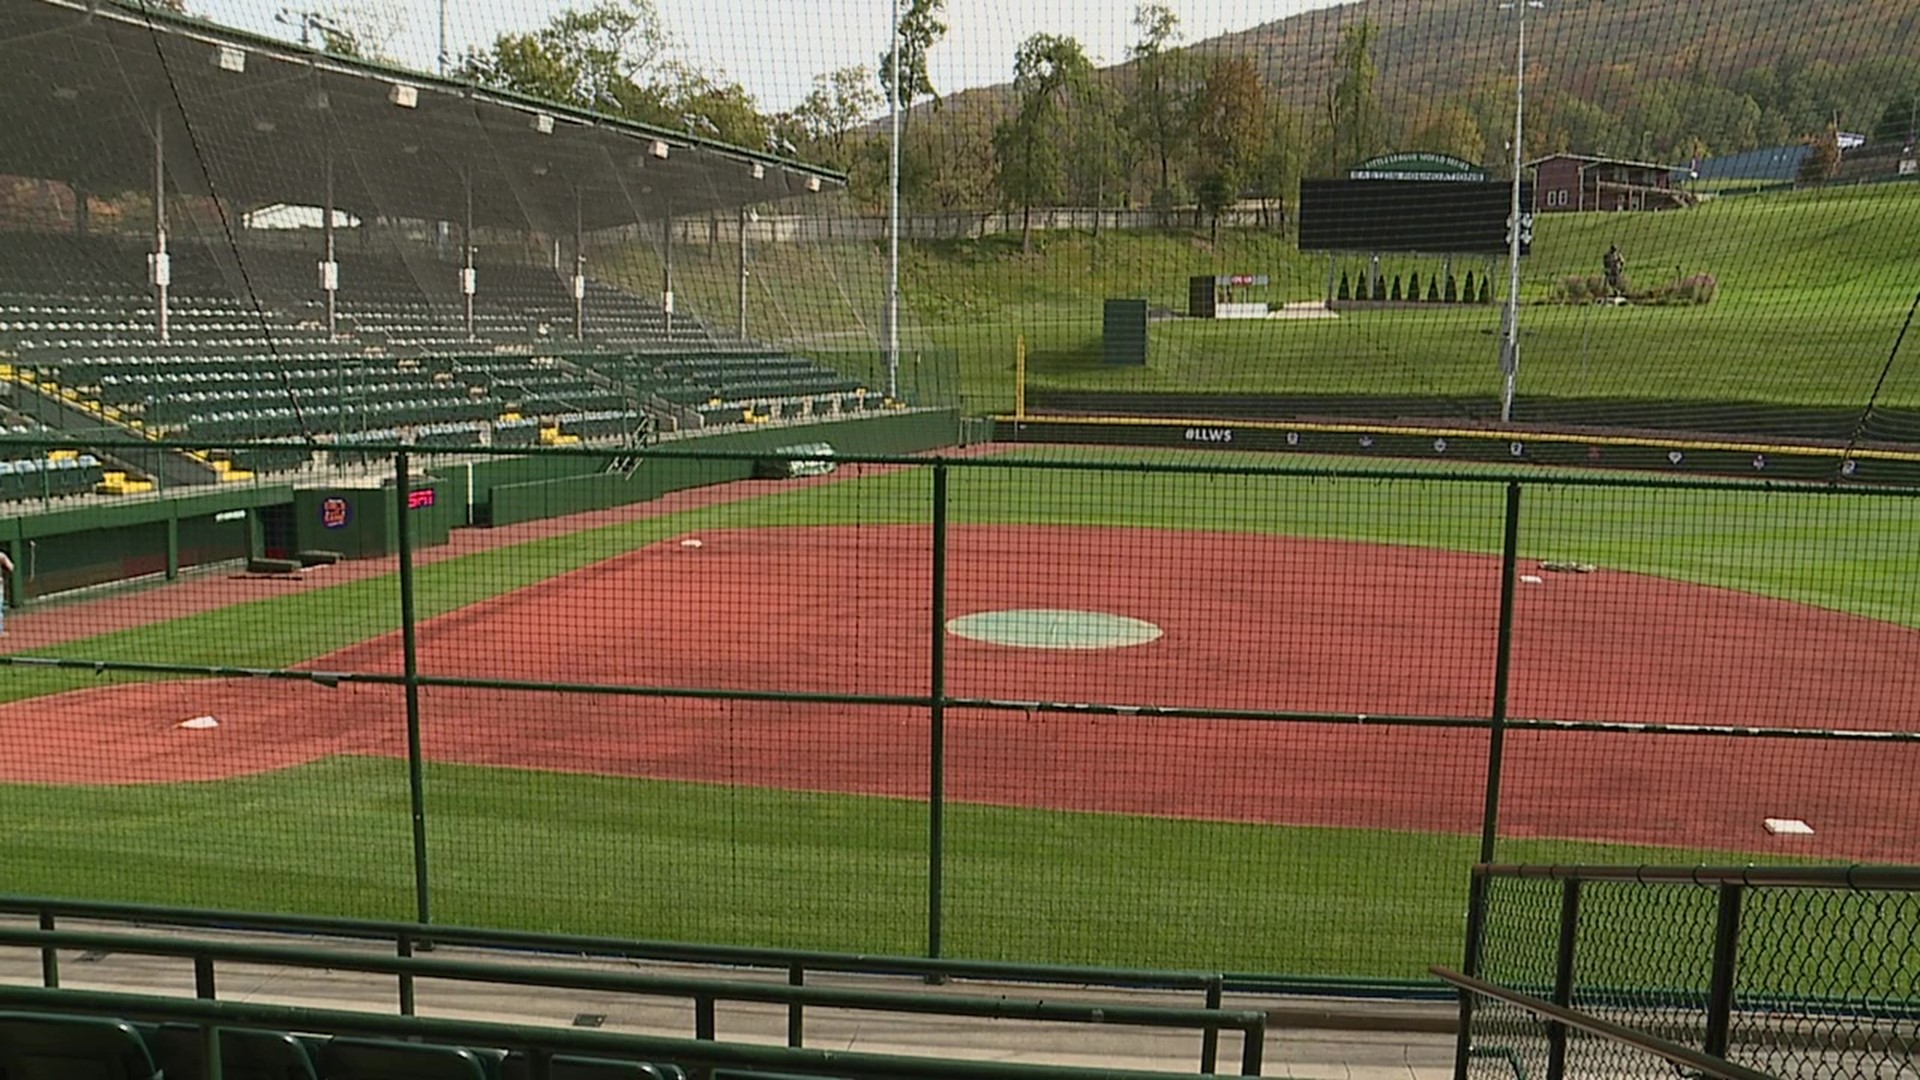 It's all about the girls this weekend in South Williamsport. Little League International is hosting its second Girls With Game Experience on Saturday.